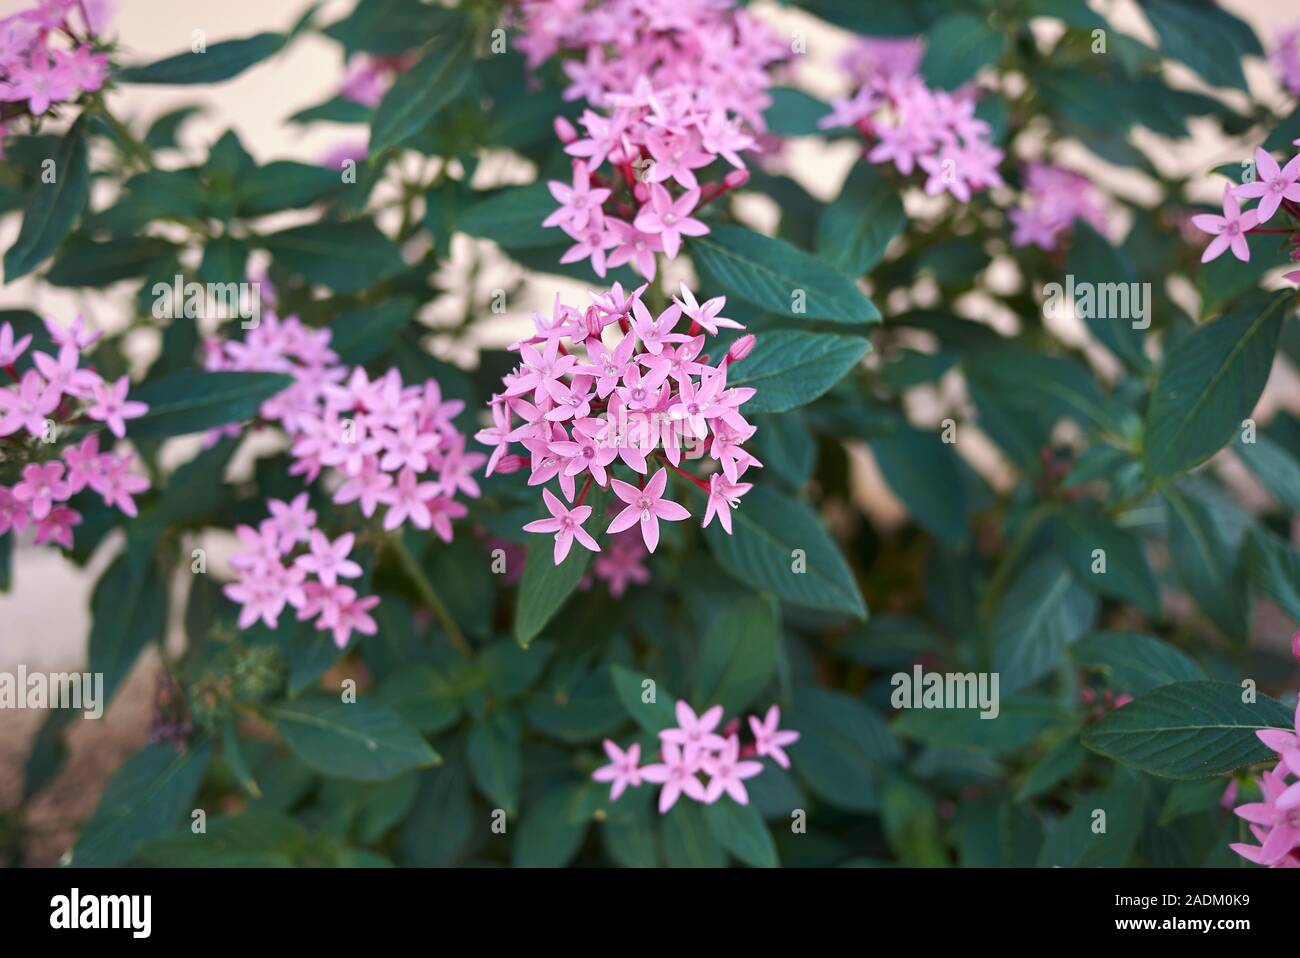 pink flowers of Pentas lanceolata plants in a garden Stock Photo